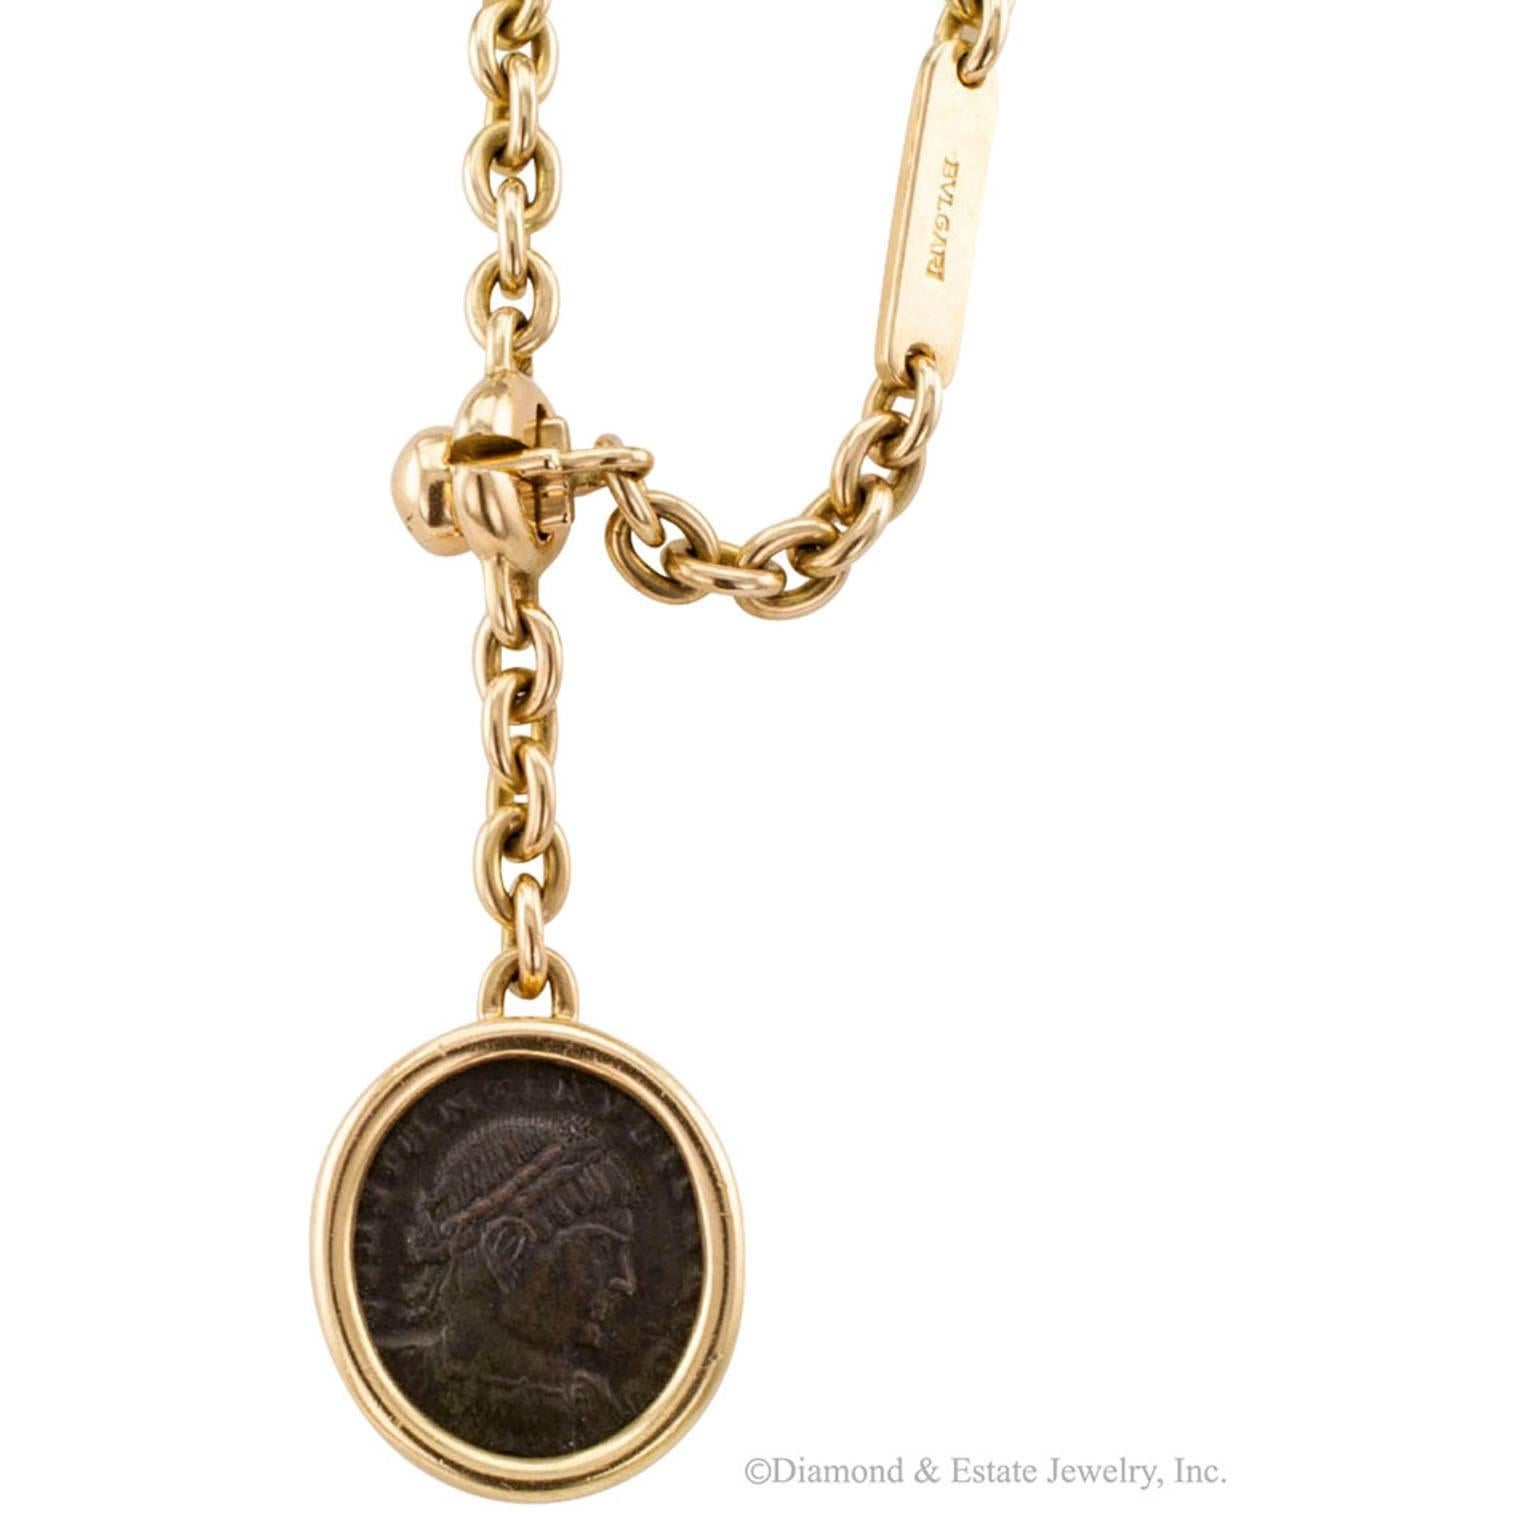 Bulgari Keychain With Ancient Roman Coin

Bulgari gold key chain with ancient Roman coin charm pendant circa 1970.  Crafted in 18-karat yellow gold with a  cleverly engineered clasp that requires the long and thin link to pass through it in order to